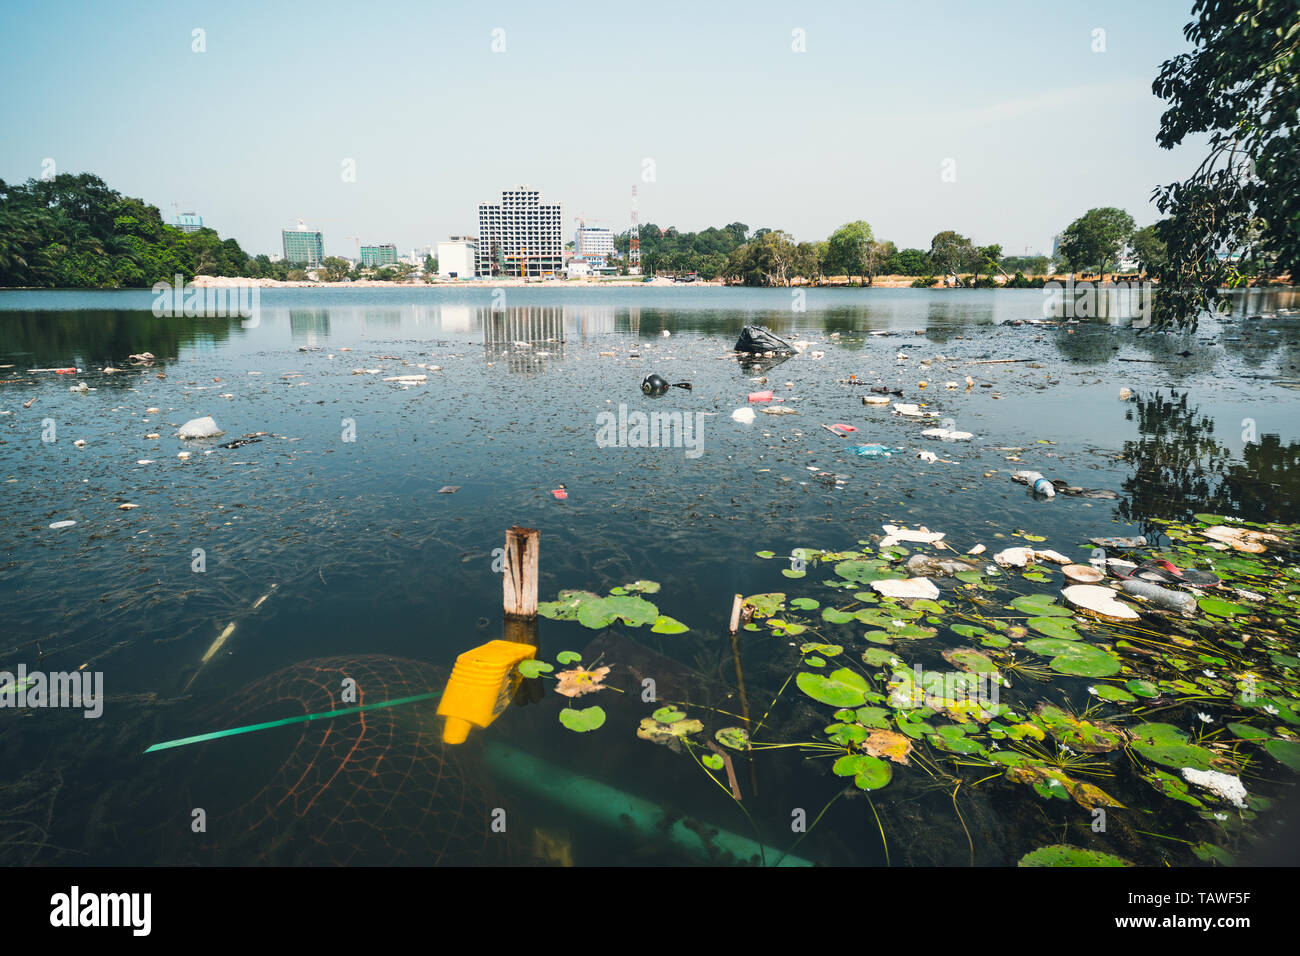 City dump in the pond in the Park. Garbage lies in the water on one of the urban landscape. plastic bottles were thrown into the water. Stock Photo